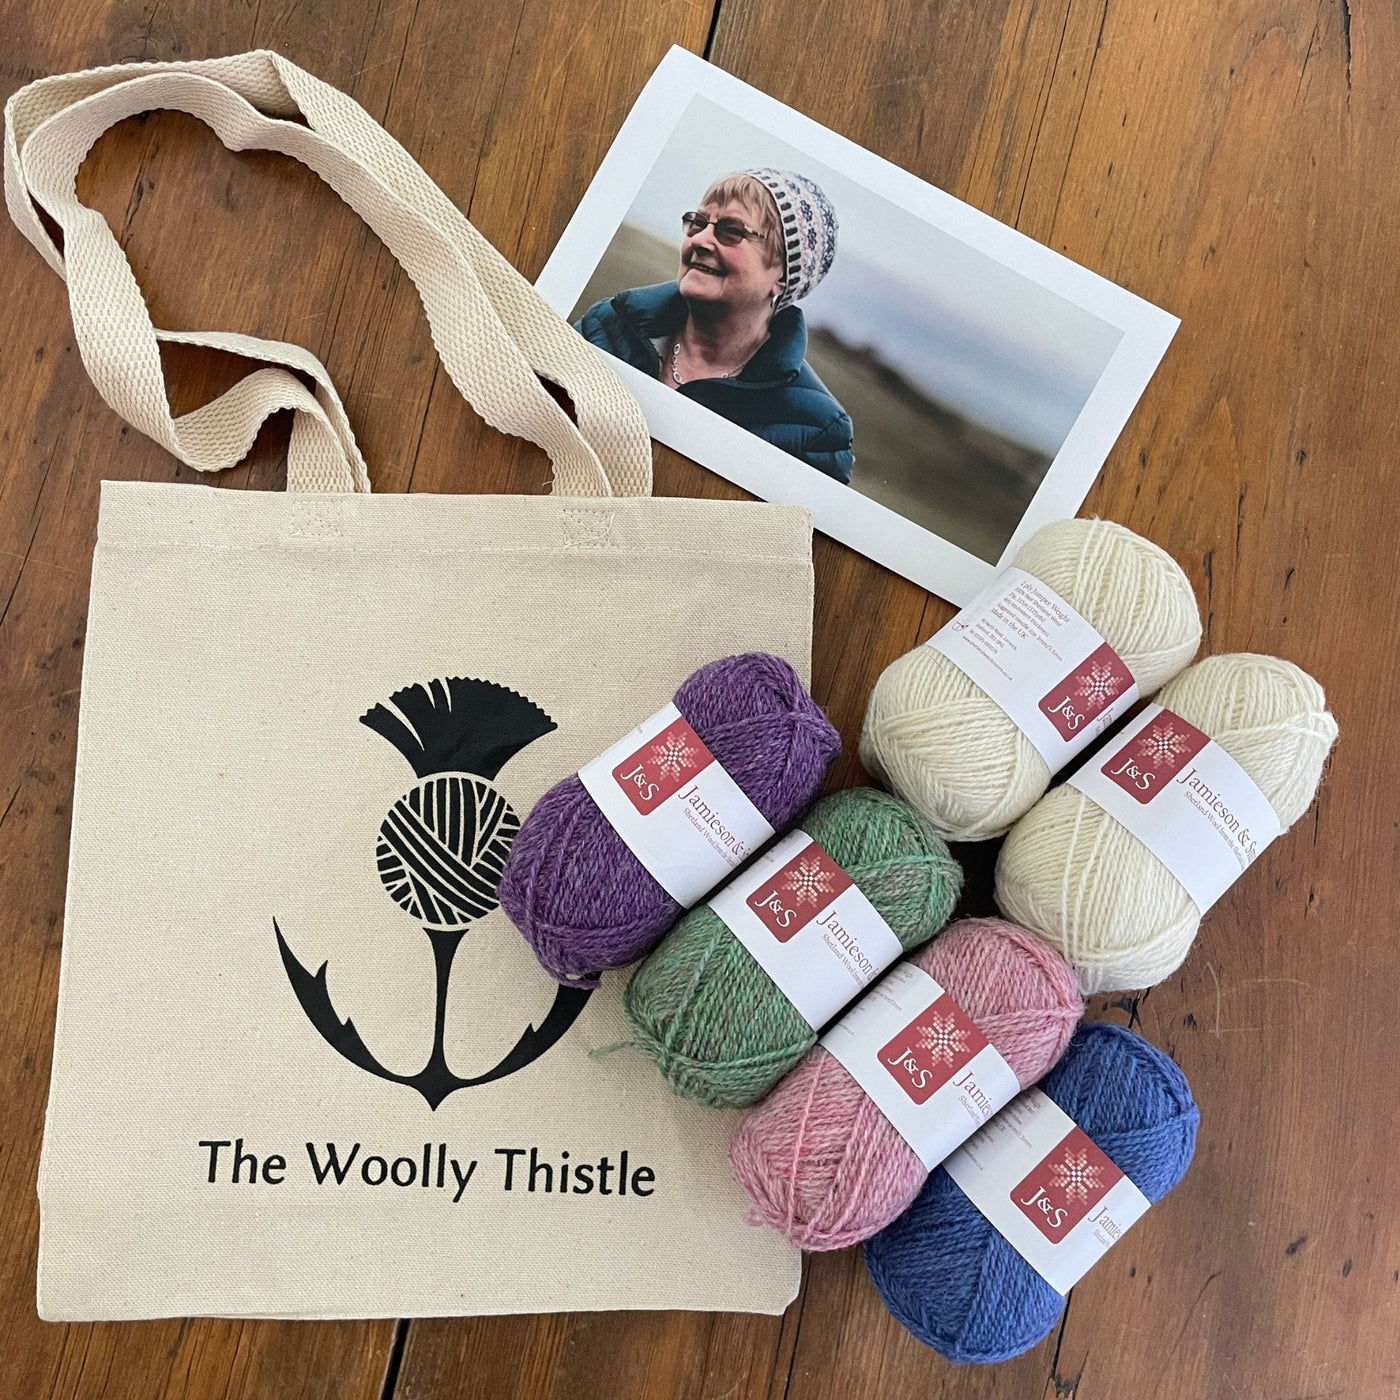 Wilma Malcomson's Katie's Kep Set components shown including 6 balls of Jamieson and Smith yarn shown with photo of woman wearing hat and a TWT tote bag.